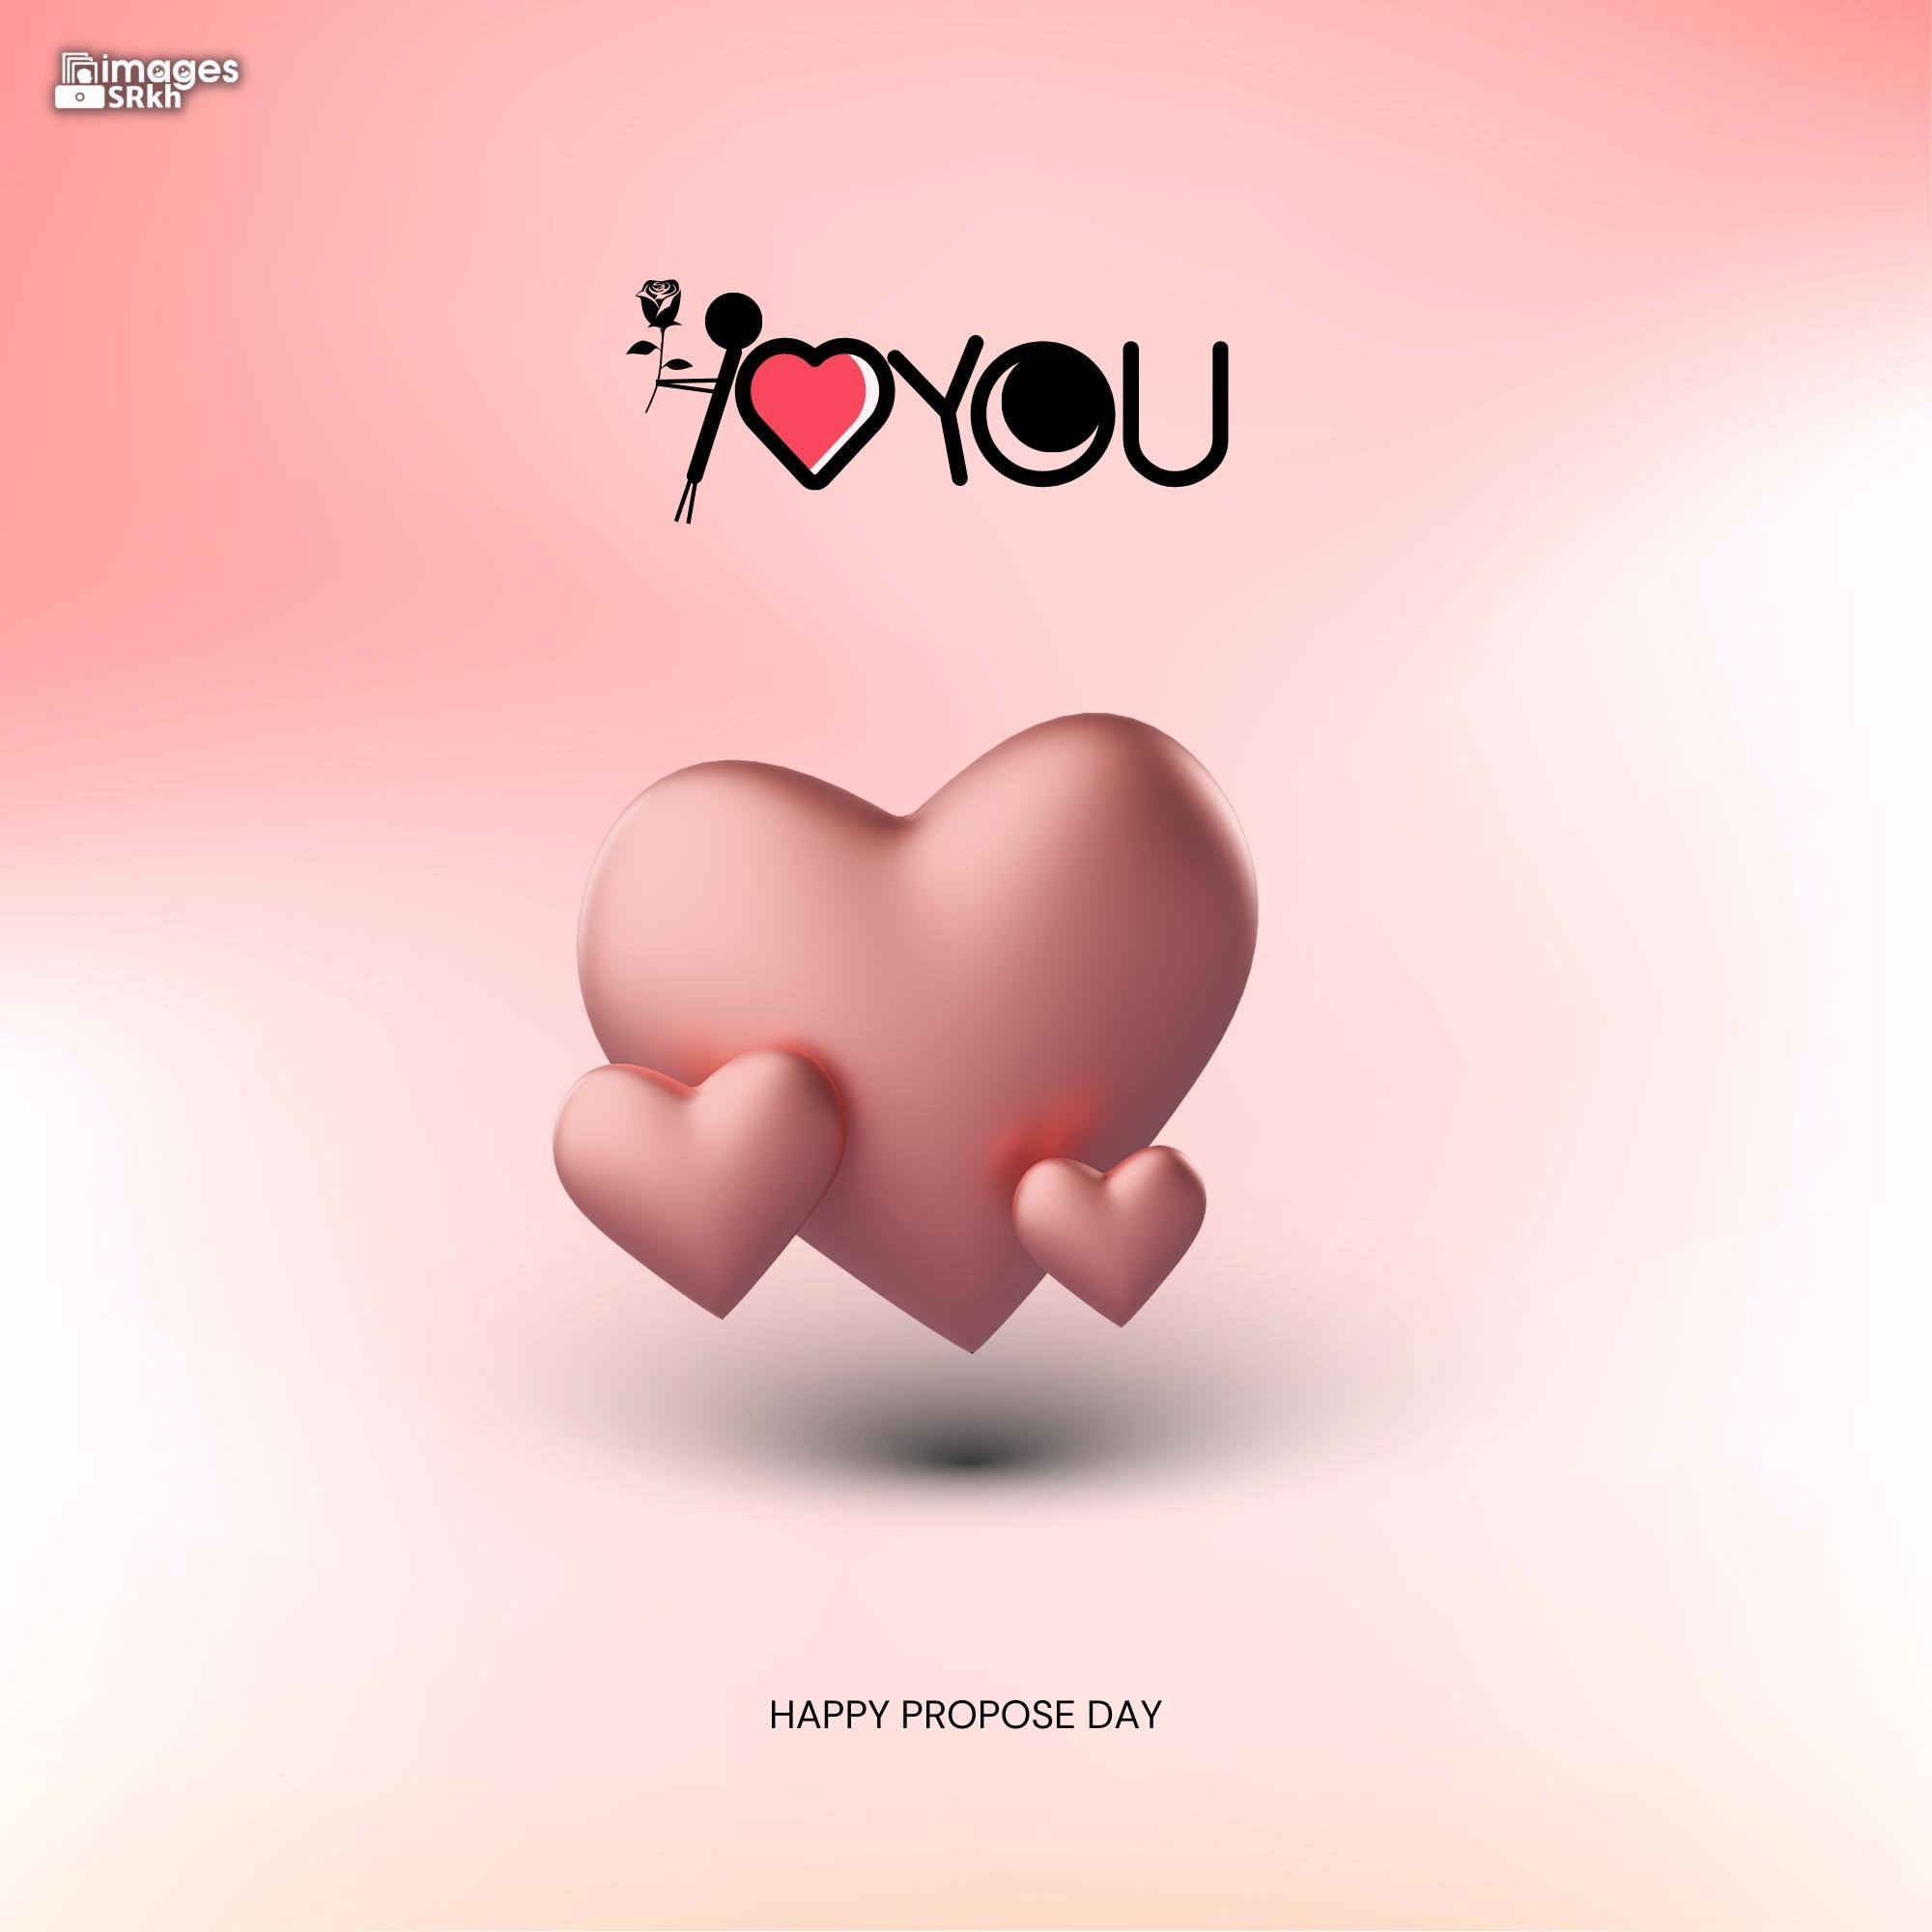 Happy Propose Day Images | 387 | I LOVE YOU